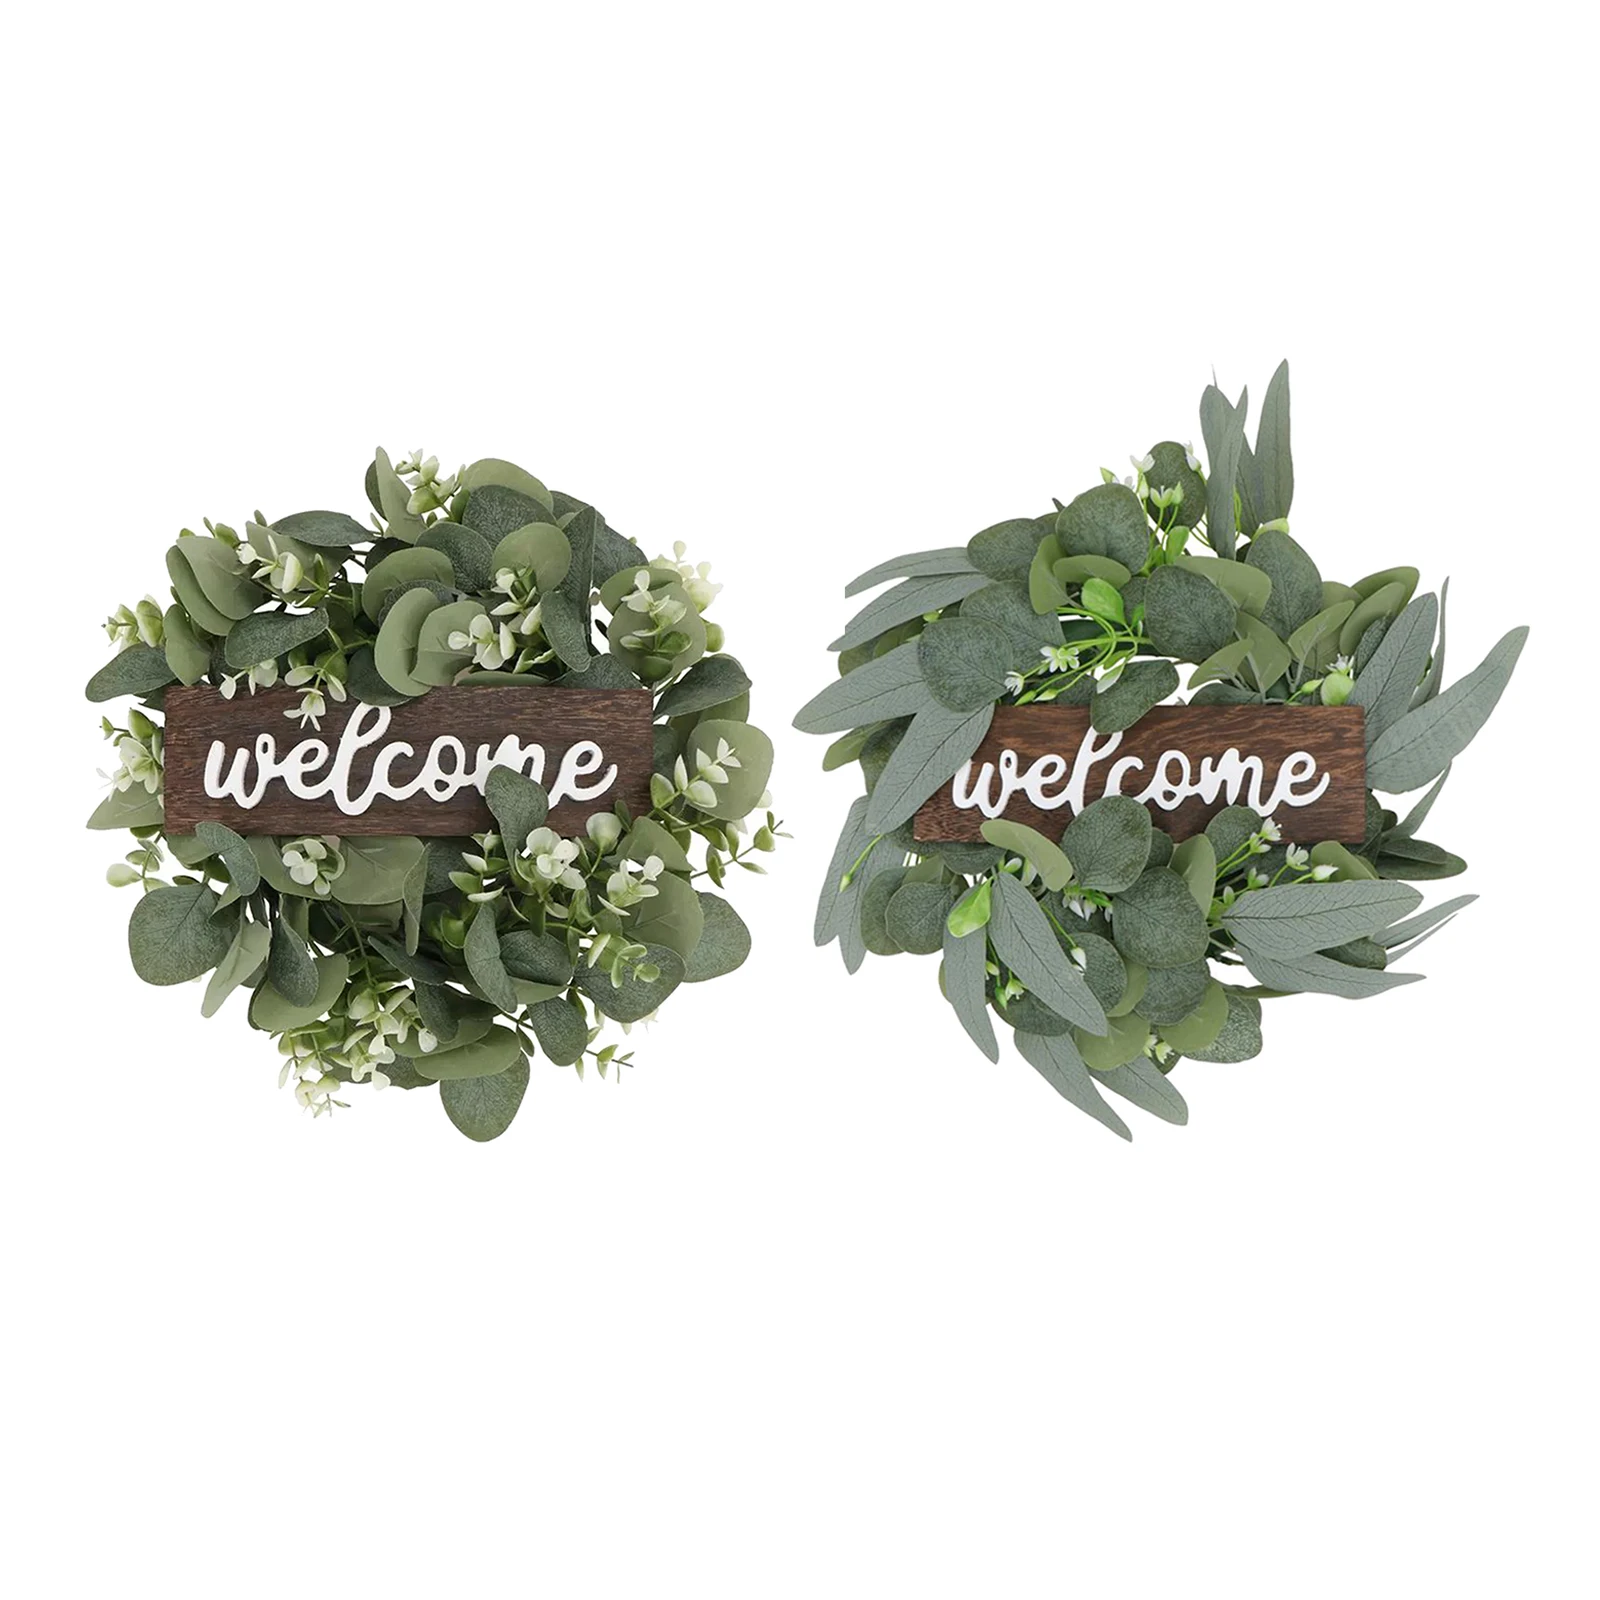 Welcome Wreath Decor Door Hanging Garland Ornament Simulation Leaf Wreath Artificial Plant Decor For Home Party